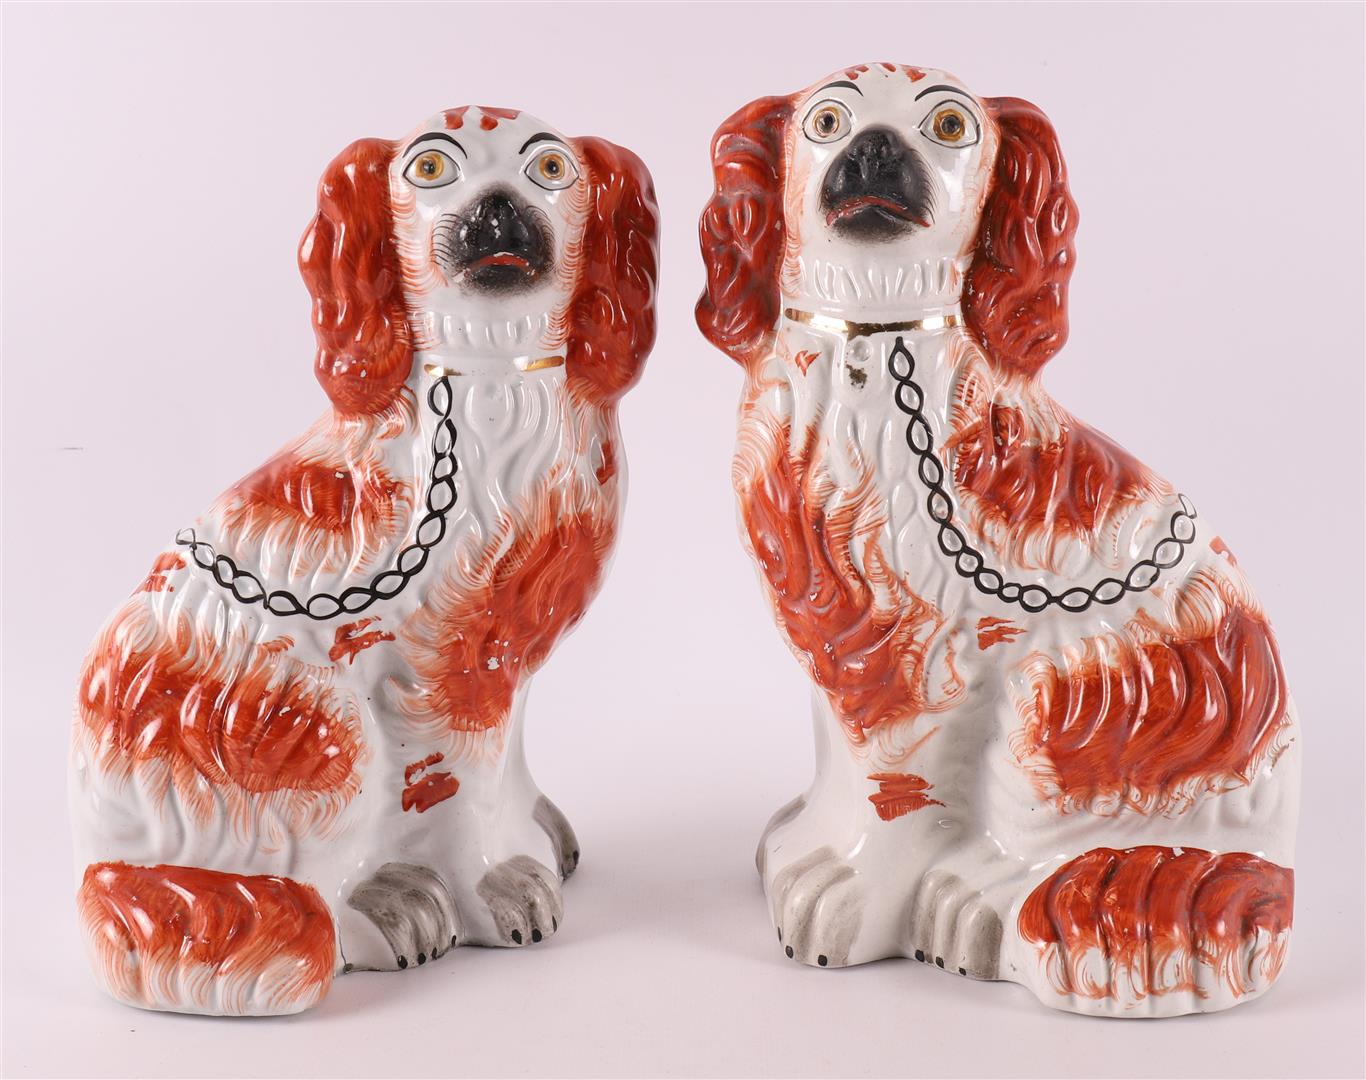 A pair of brown/white earthenware dogs, England, Staffordshire, 19th century.